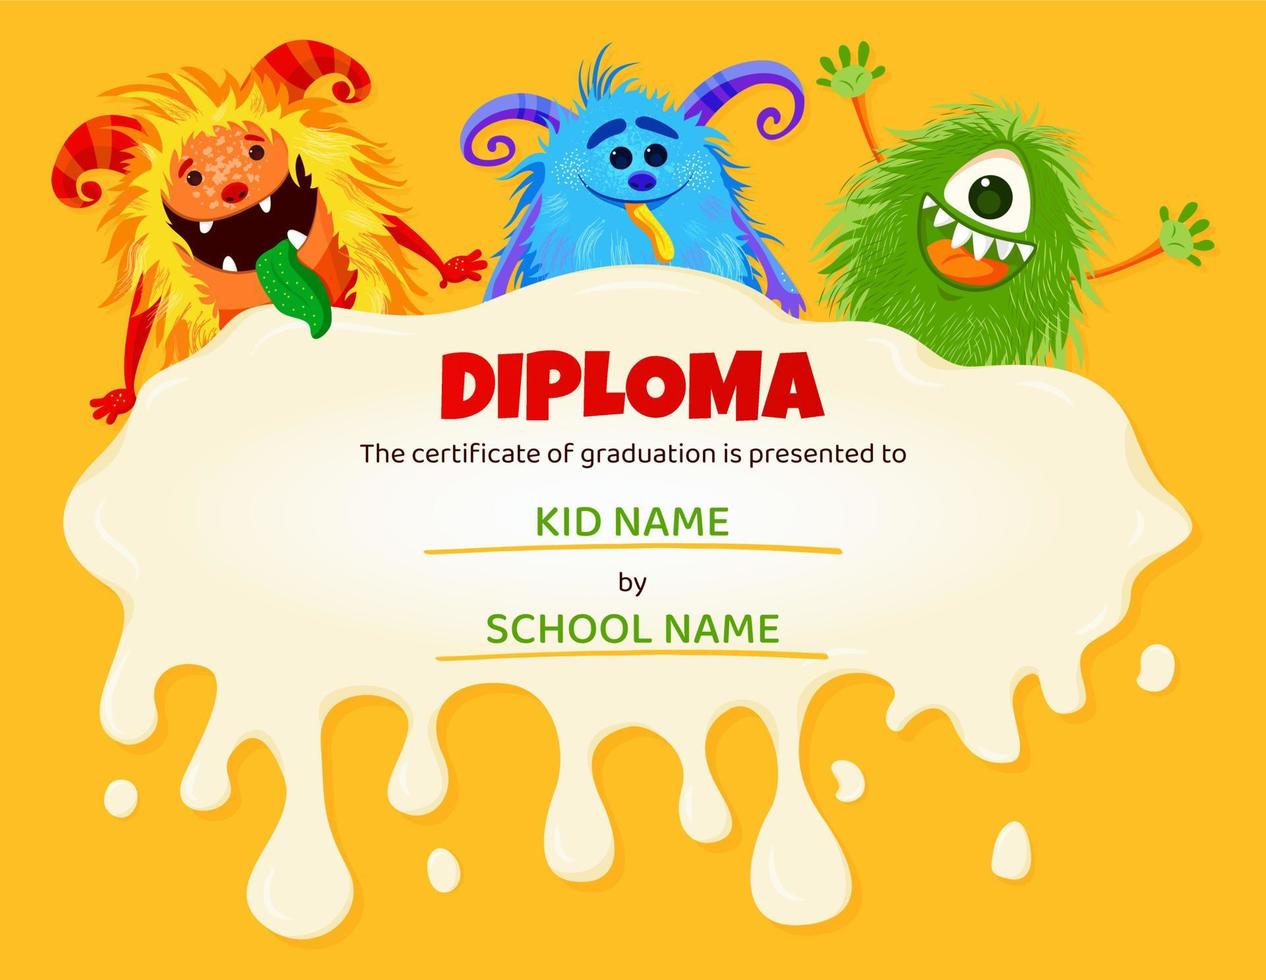 Kids diploma with cartoon funny monster characters. Education award frame template for school, summer camp or kindergarten certificate. Vector certificate with Monsters.